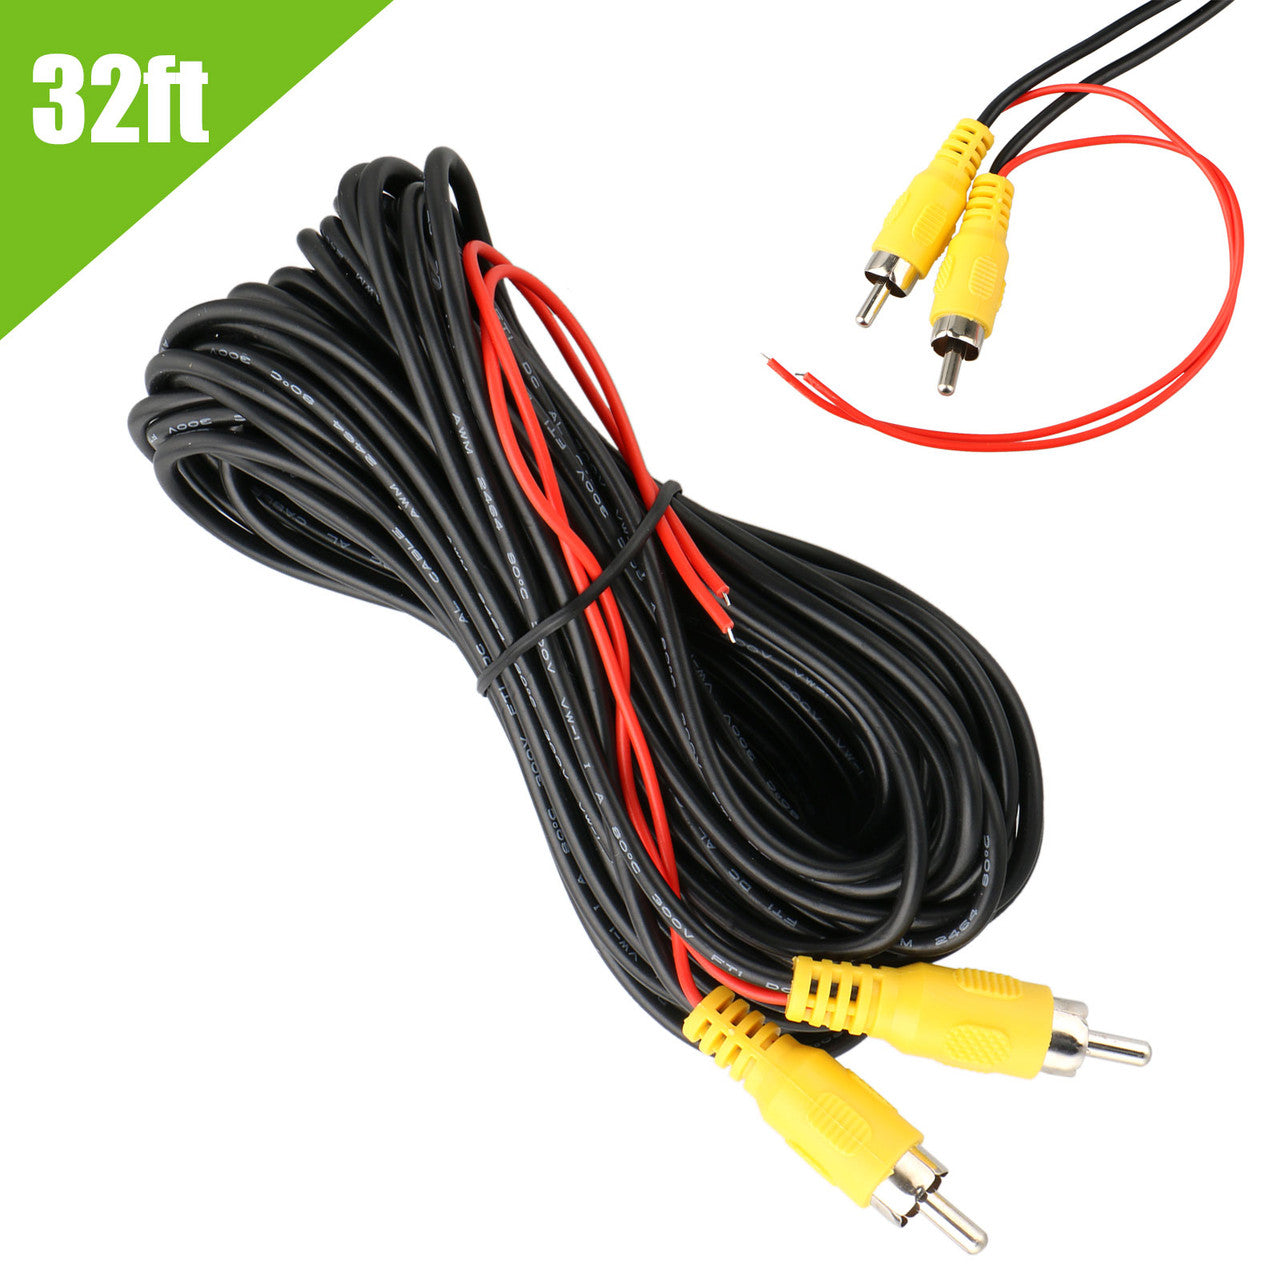 Car Video RCA Extension Cable for Auto Backup Camera Monitor Rear View Parking System with Detection Wire Reverse Trigger Lead for GPS Navigation, 32ft